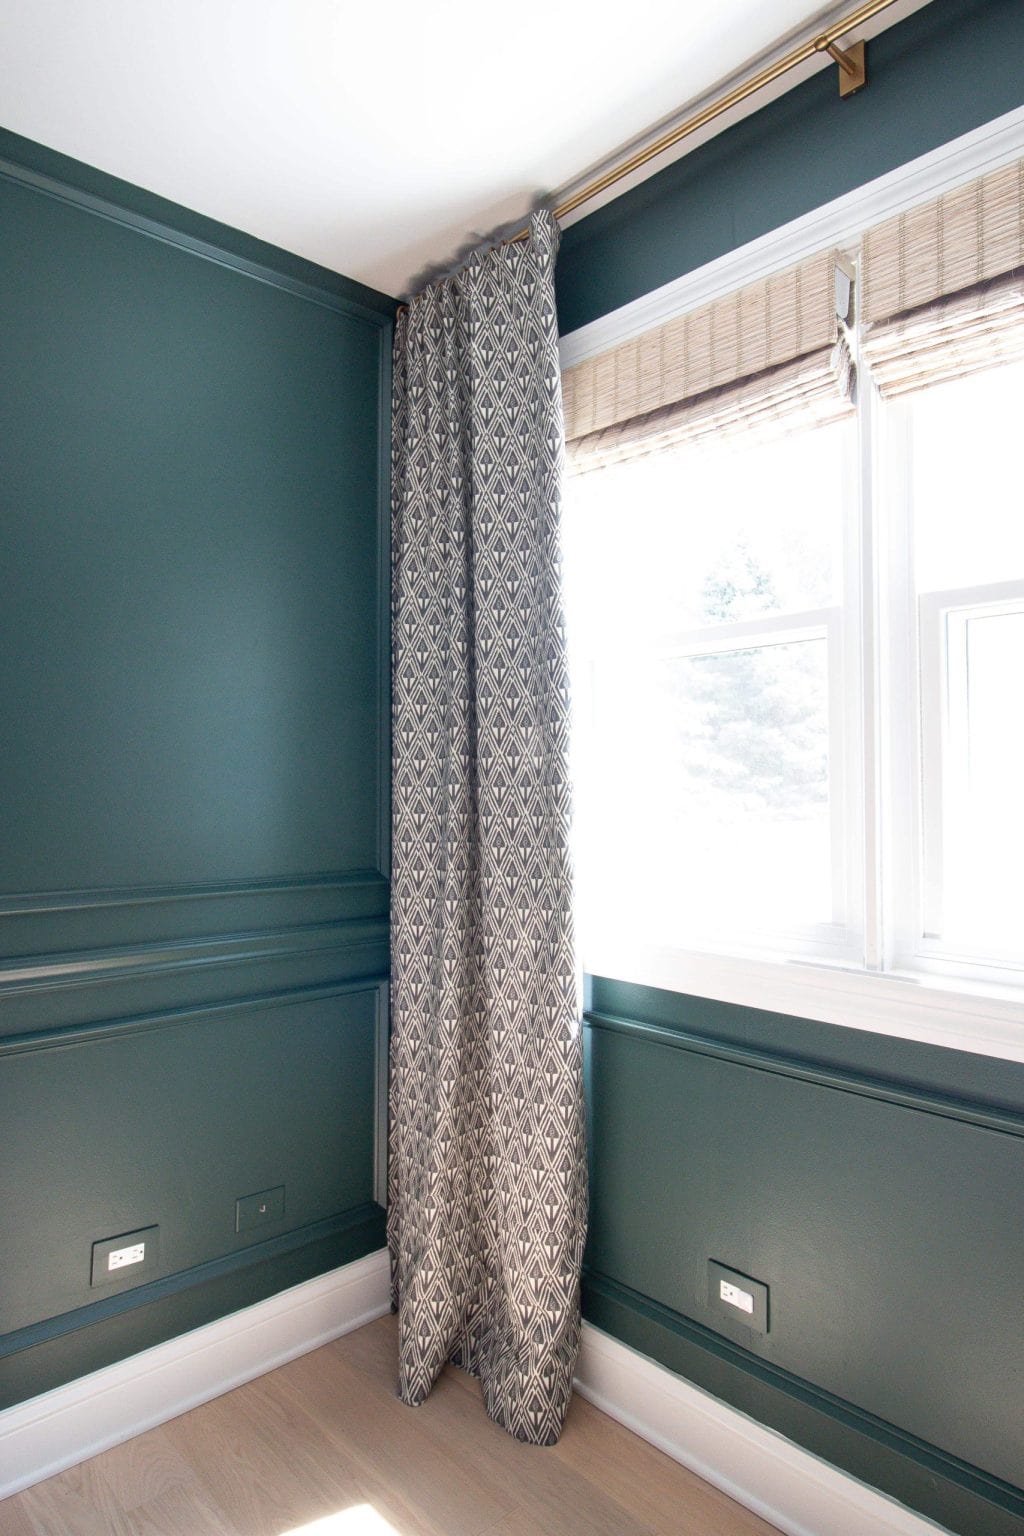 Our new blackout nursery curtains from Pottery Barn